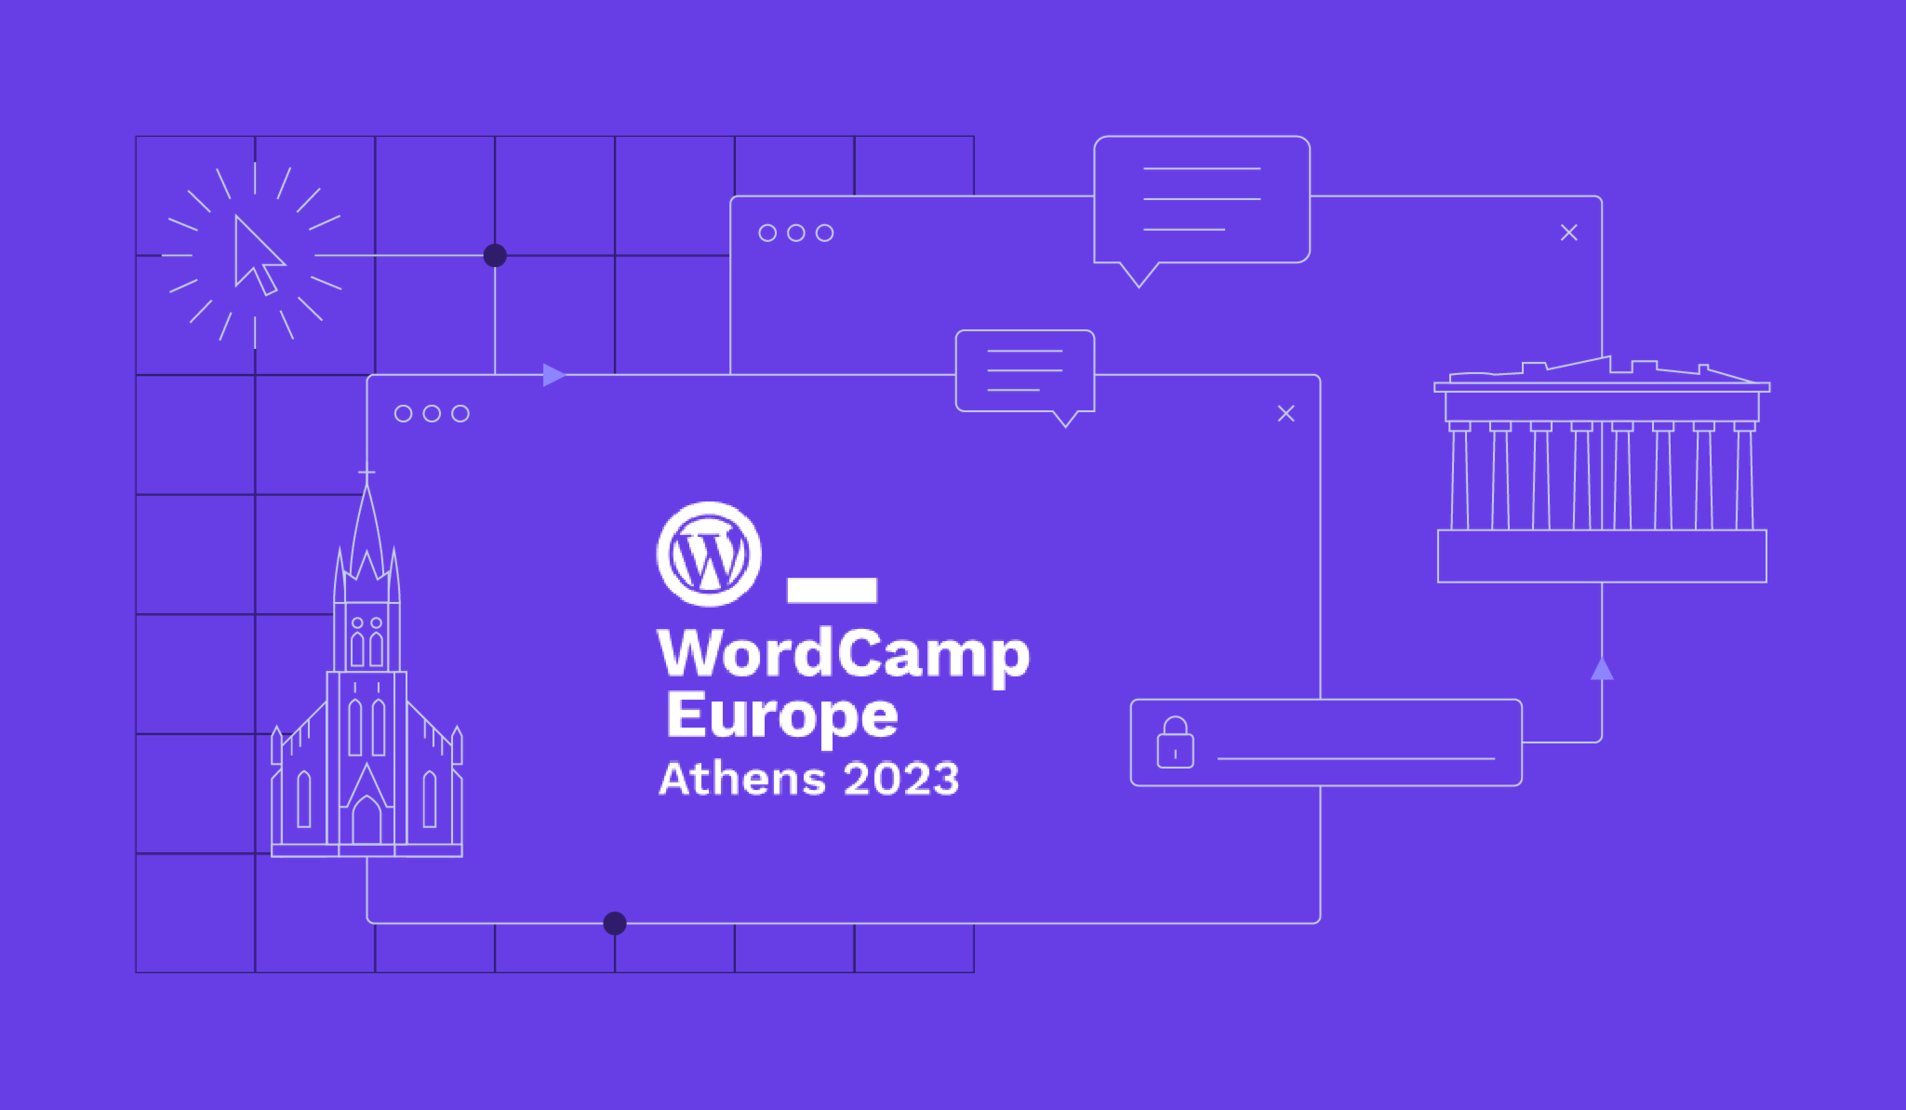 Hostinger Is Coming to WordCamp Europe